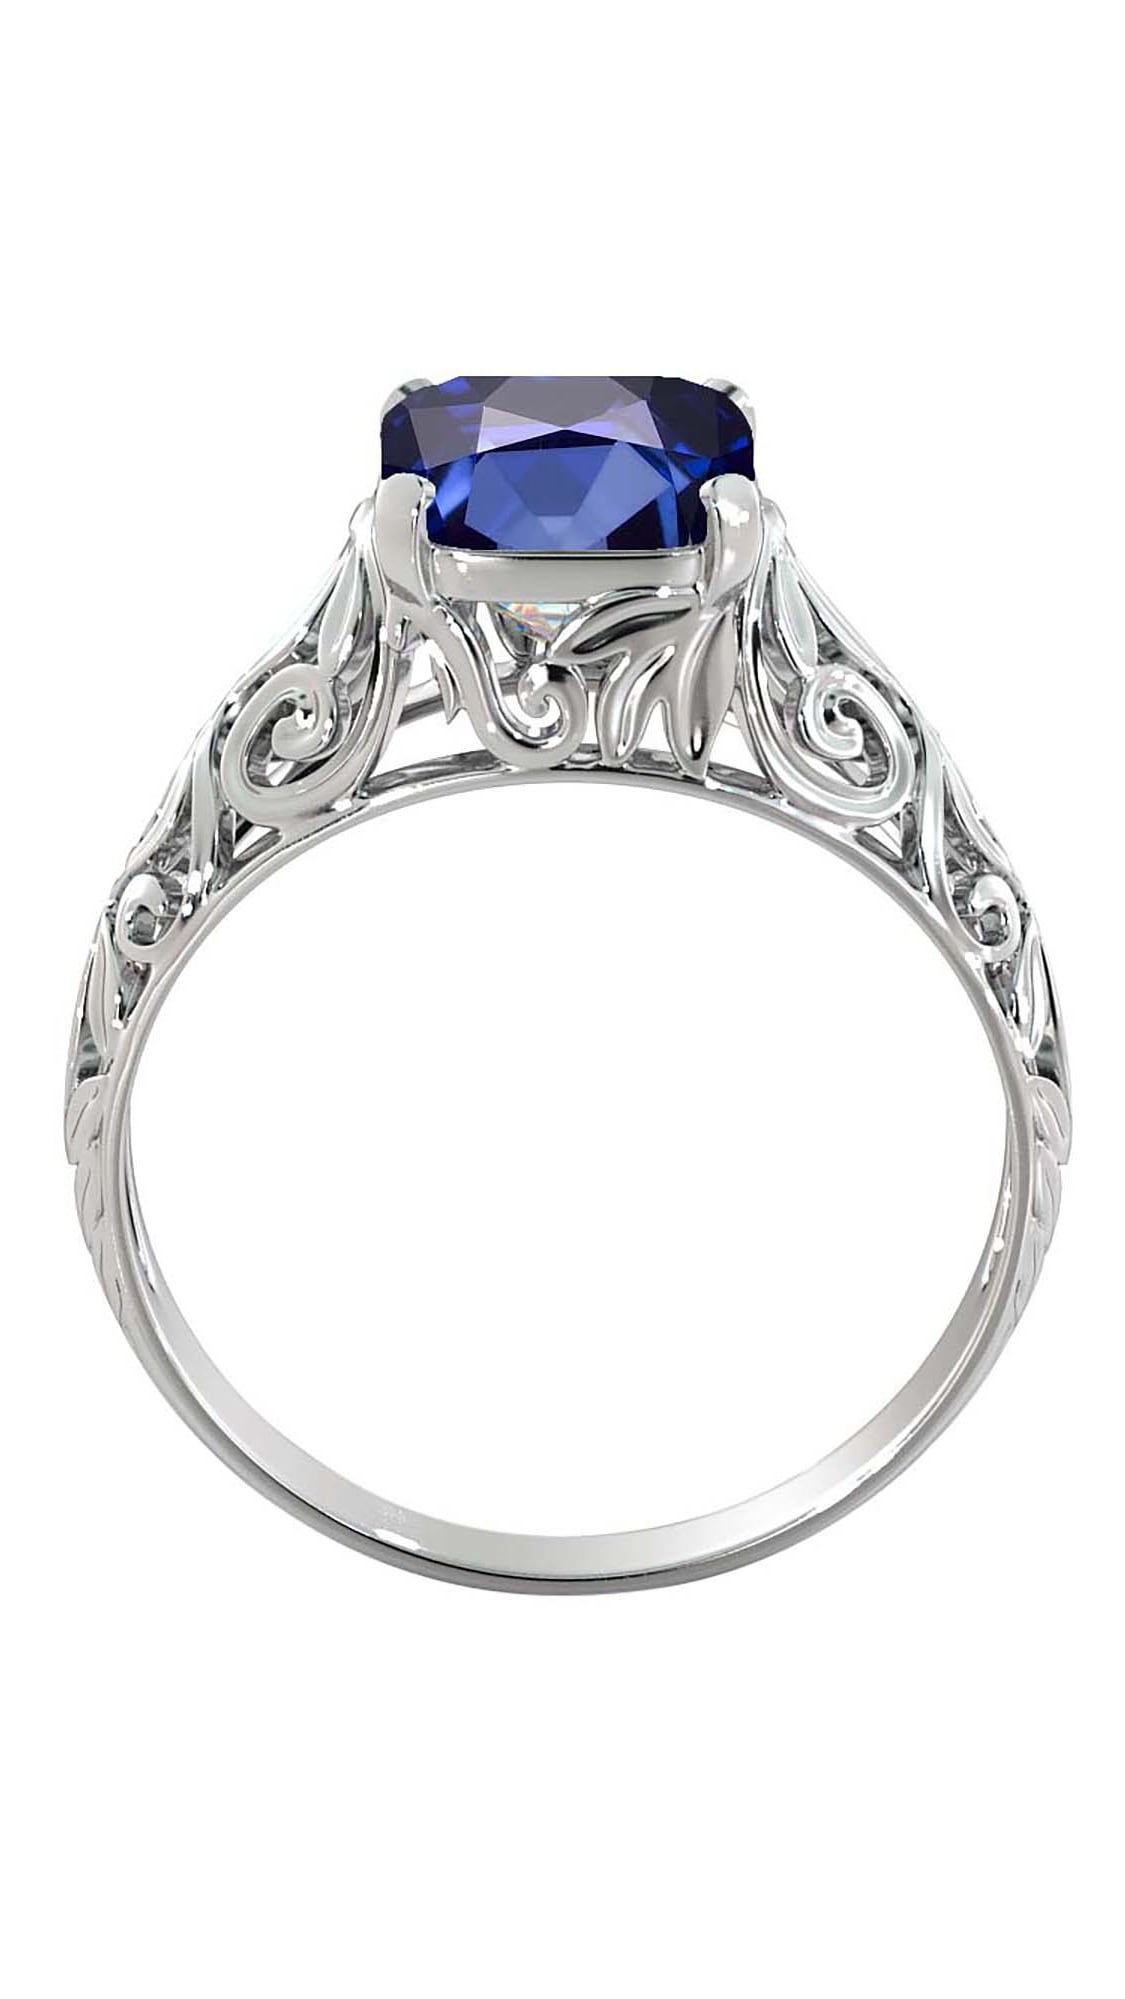 Vintage Art Deco 2Ct Oval Sapphire Cocktail Engagement Ring 14k White Gold Over 